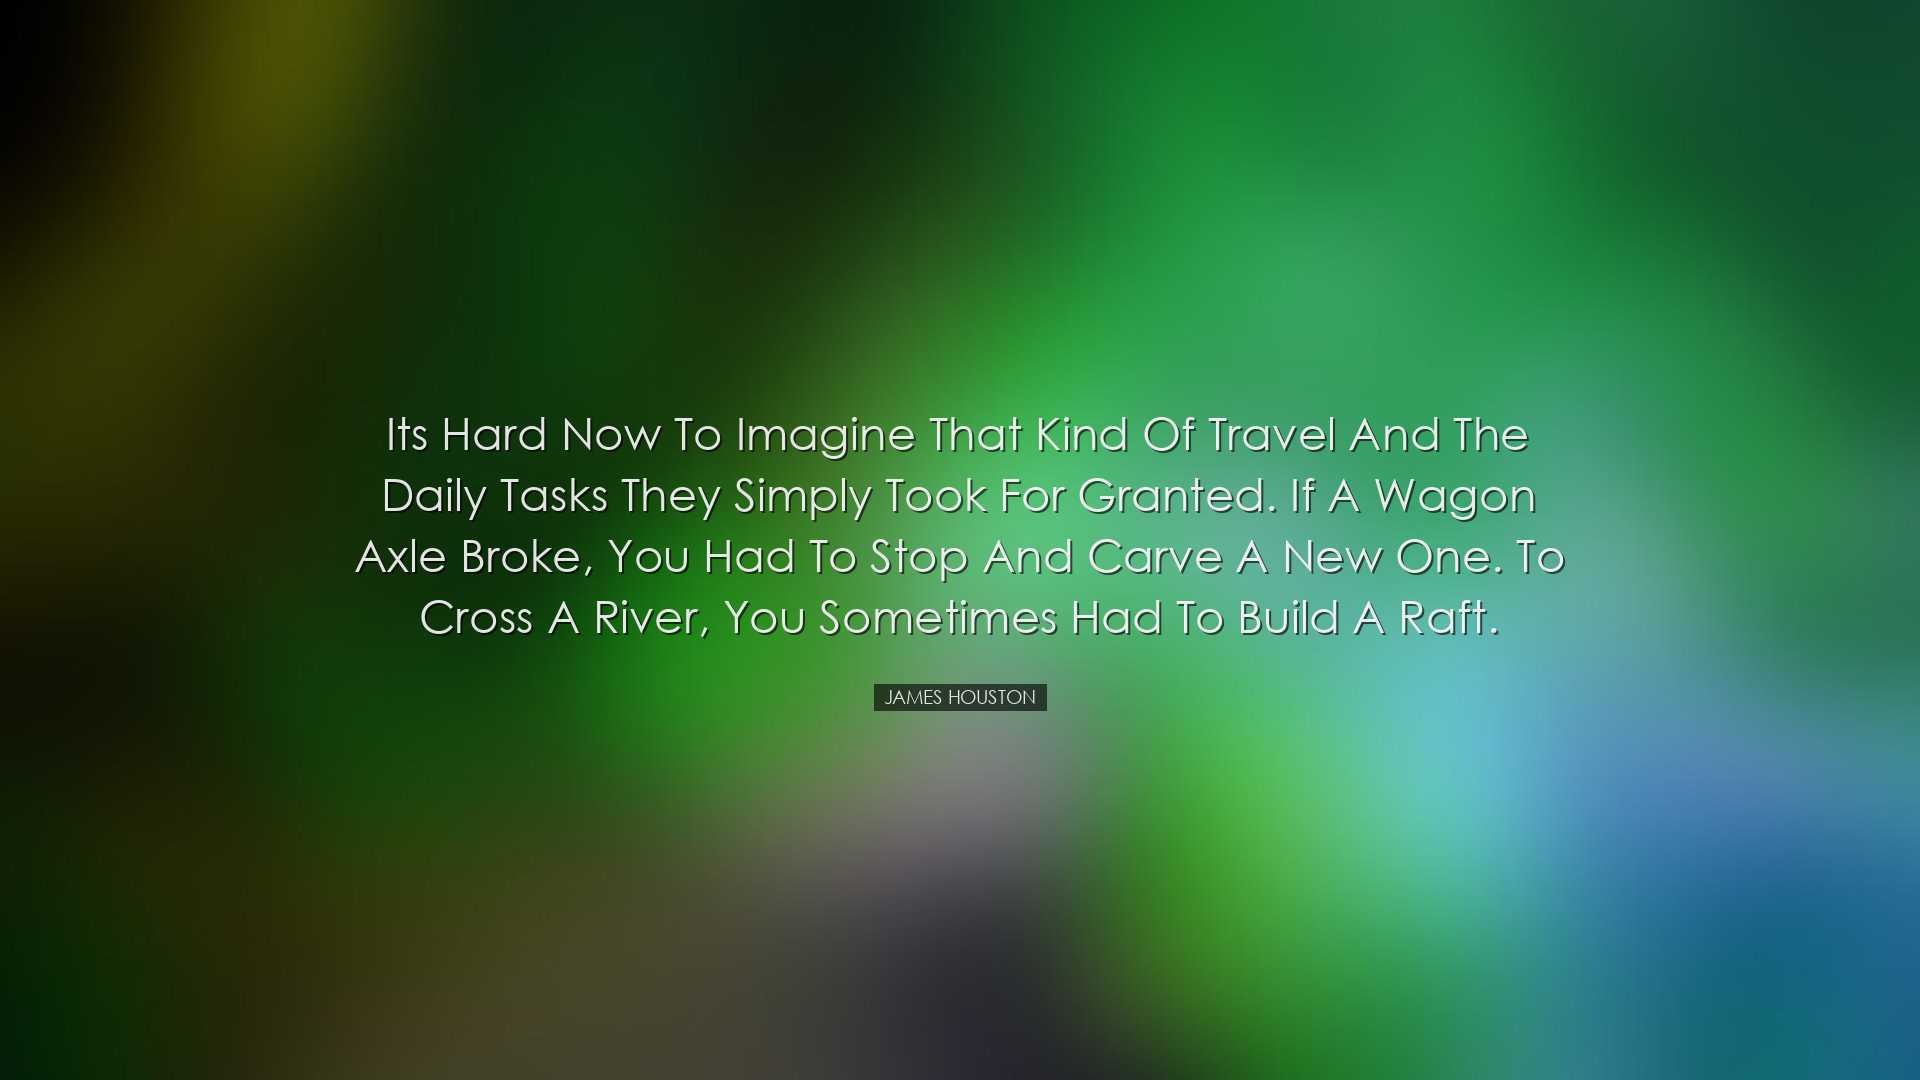 Its hard now to imagine that kind of travel and the daily tasks th